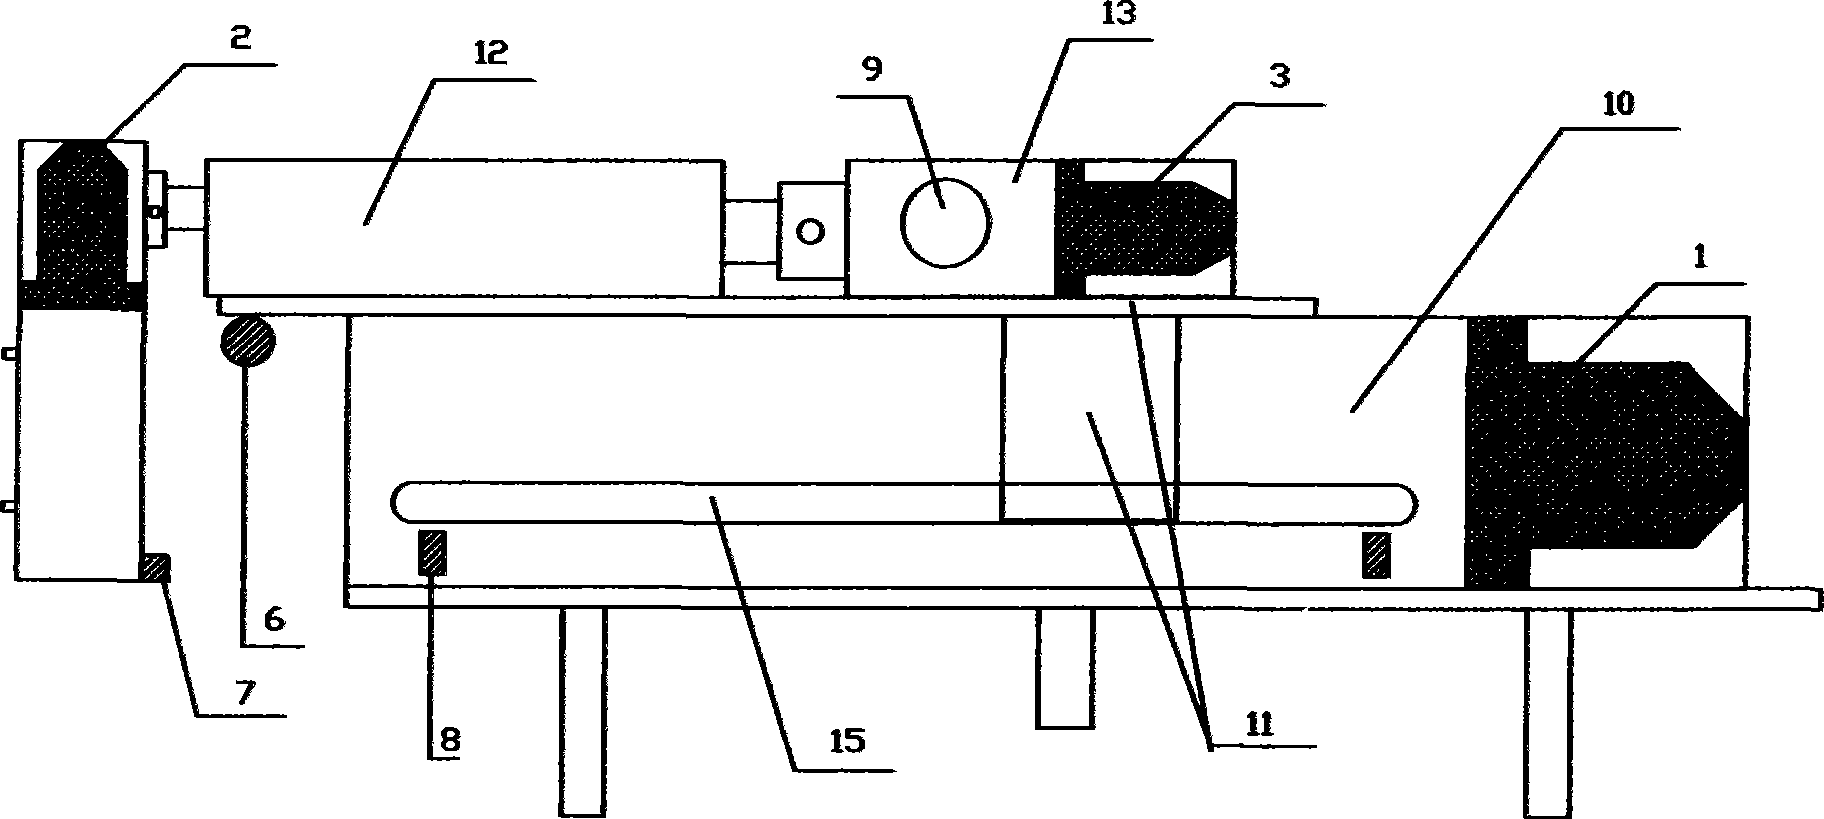 Round code-spurting device in coil strip